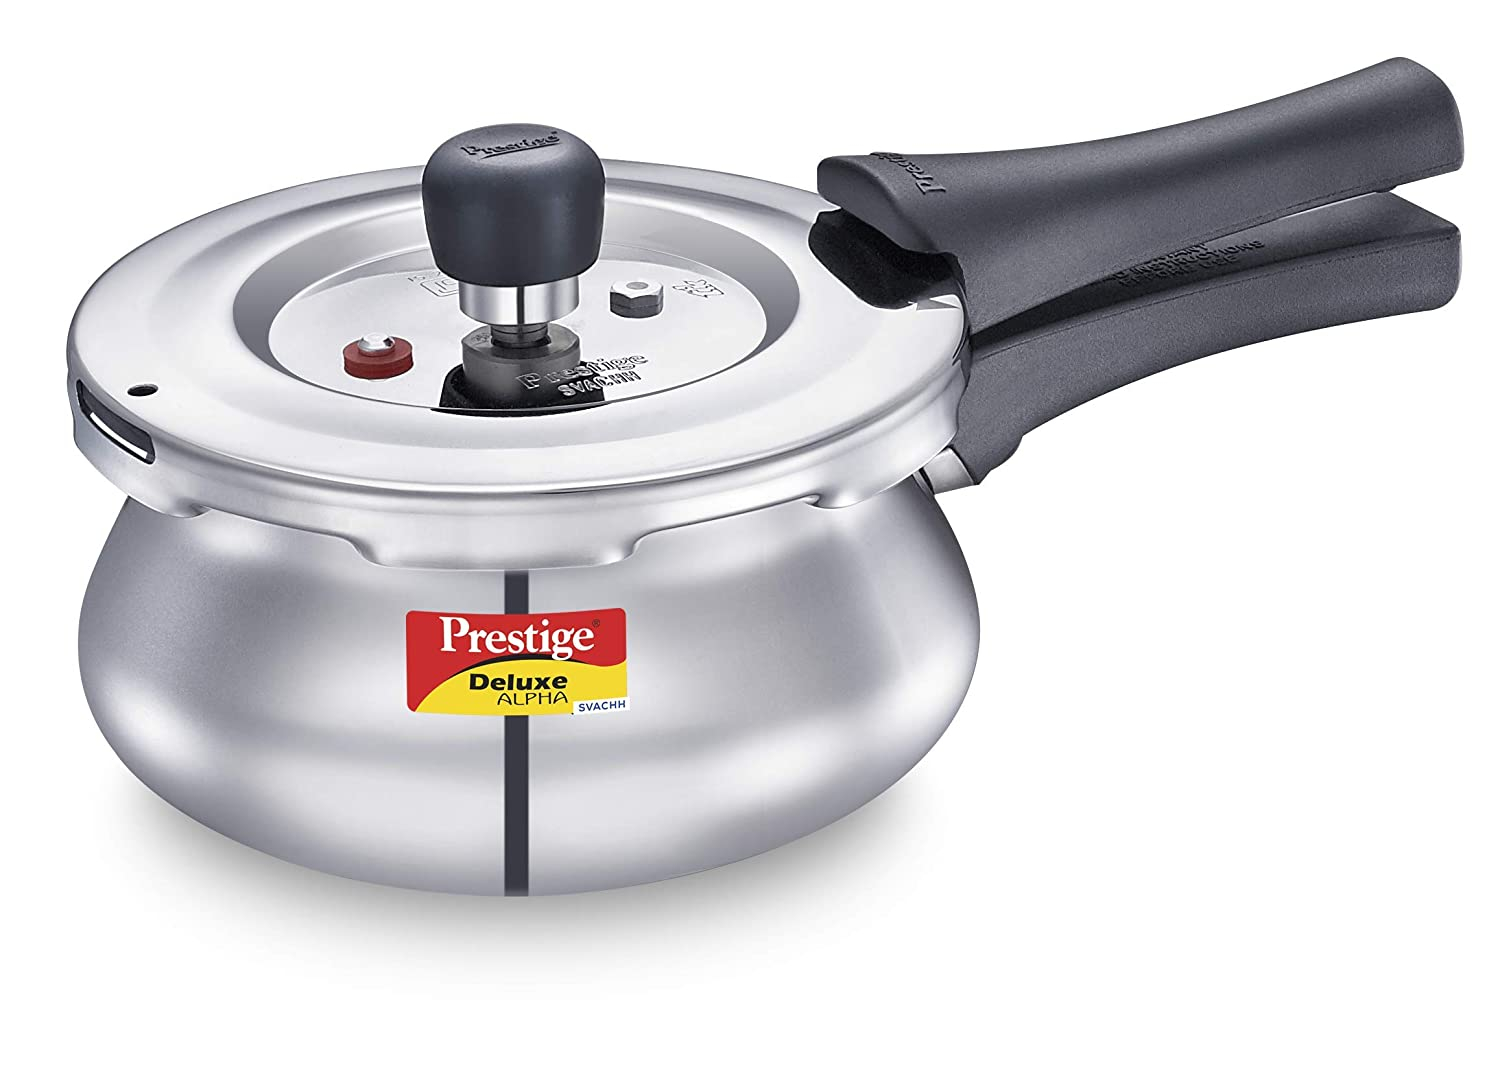 Prestige 1.5 L  Deluxe Alpha Svachh deep lid for Spillage Control with glass Lid 20265 at the lowest price in India at Apnidukaan.com, Save 17% Off, All India Free Shipping, Click here to see all of our exclusive deals.  Capacity : 1.5 Litre, Stainless st